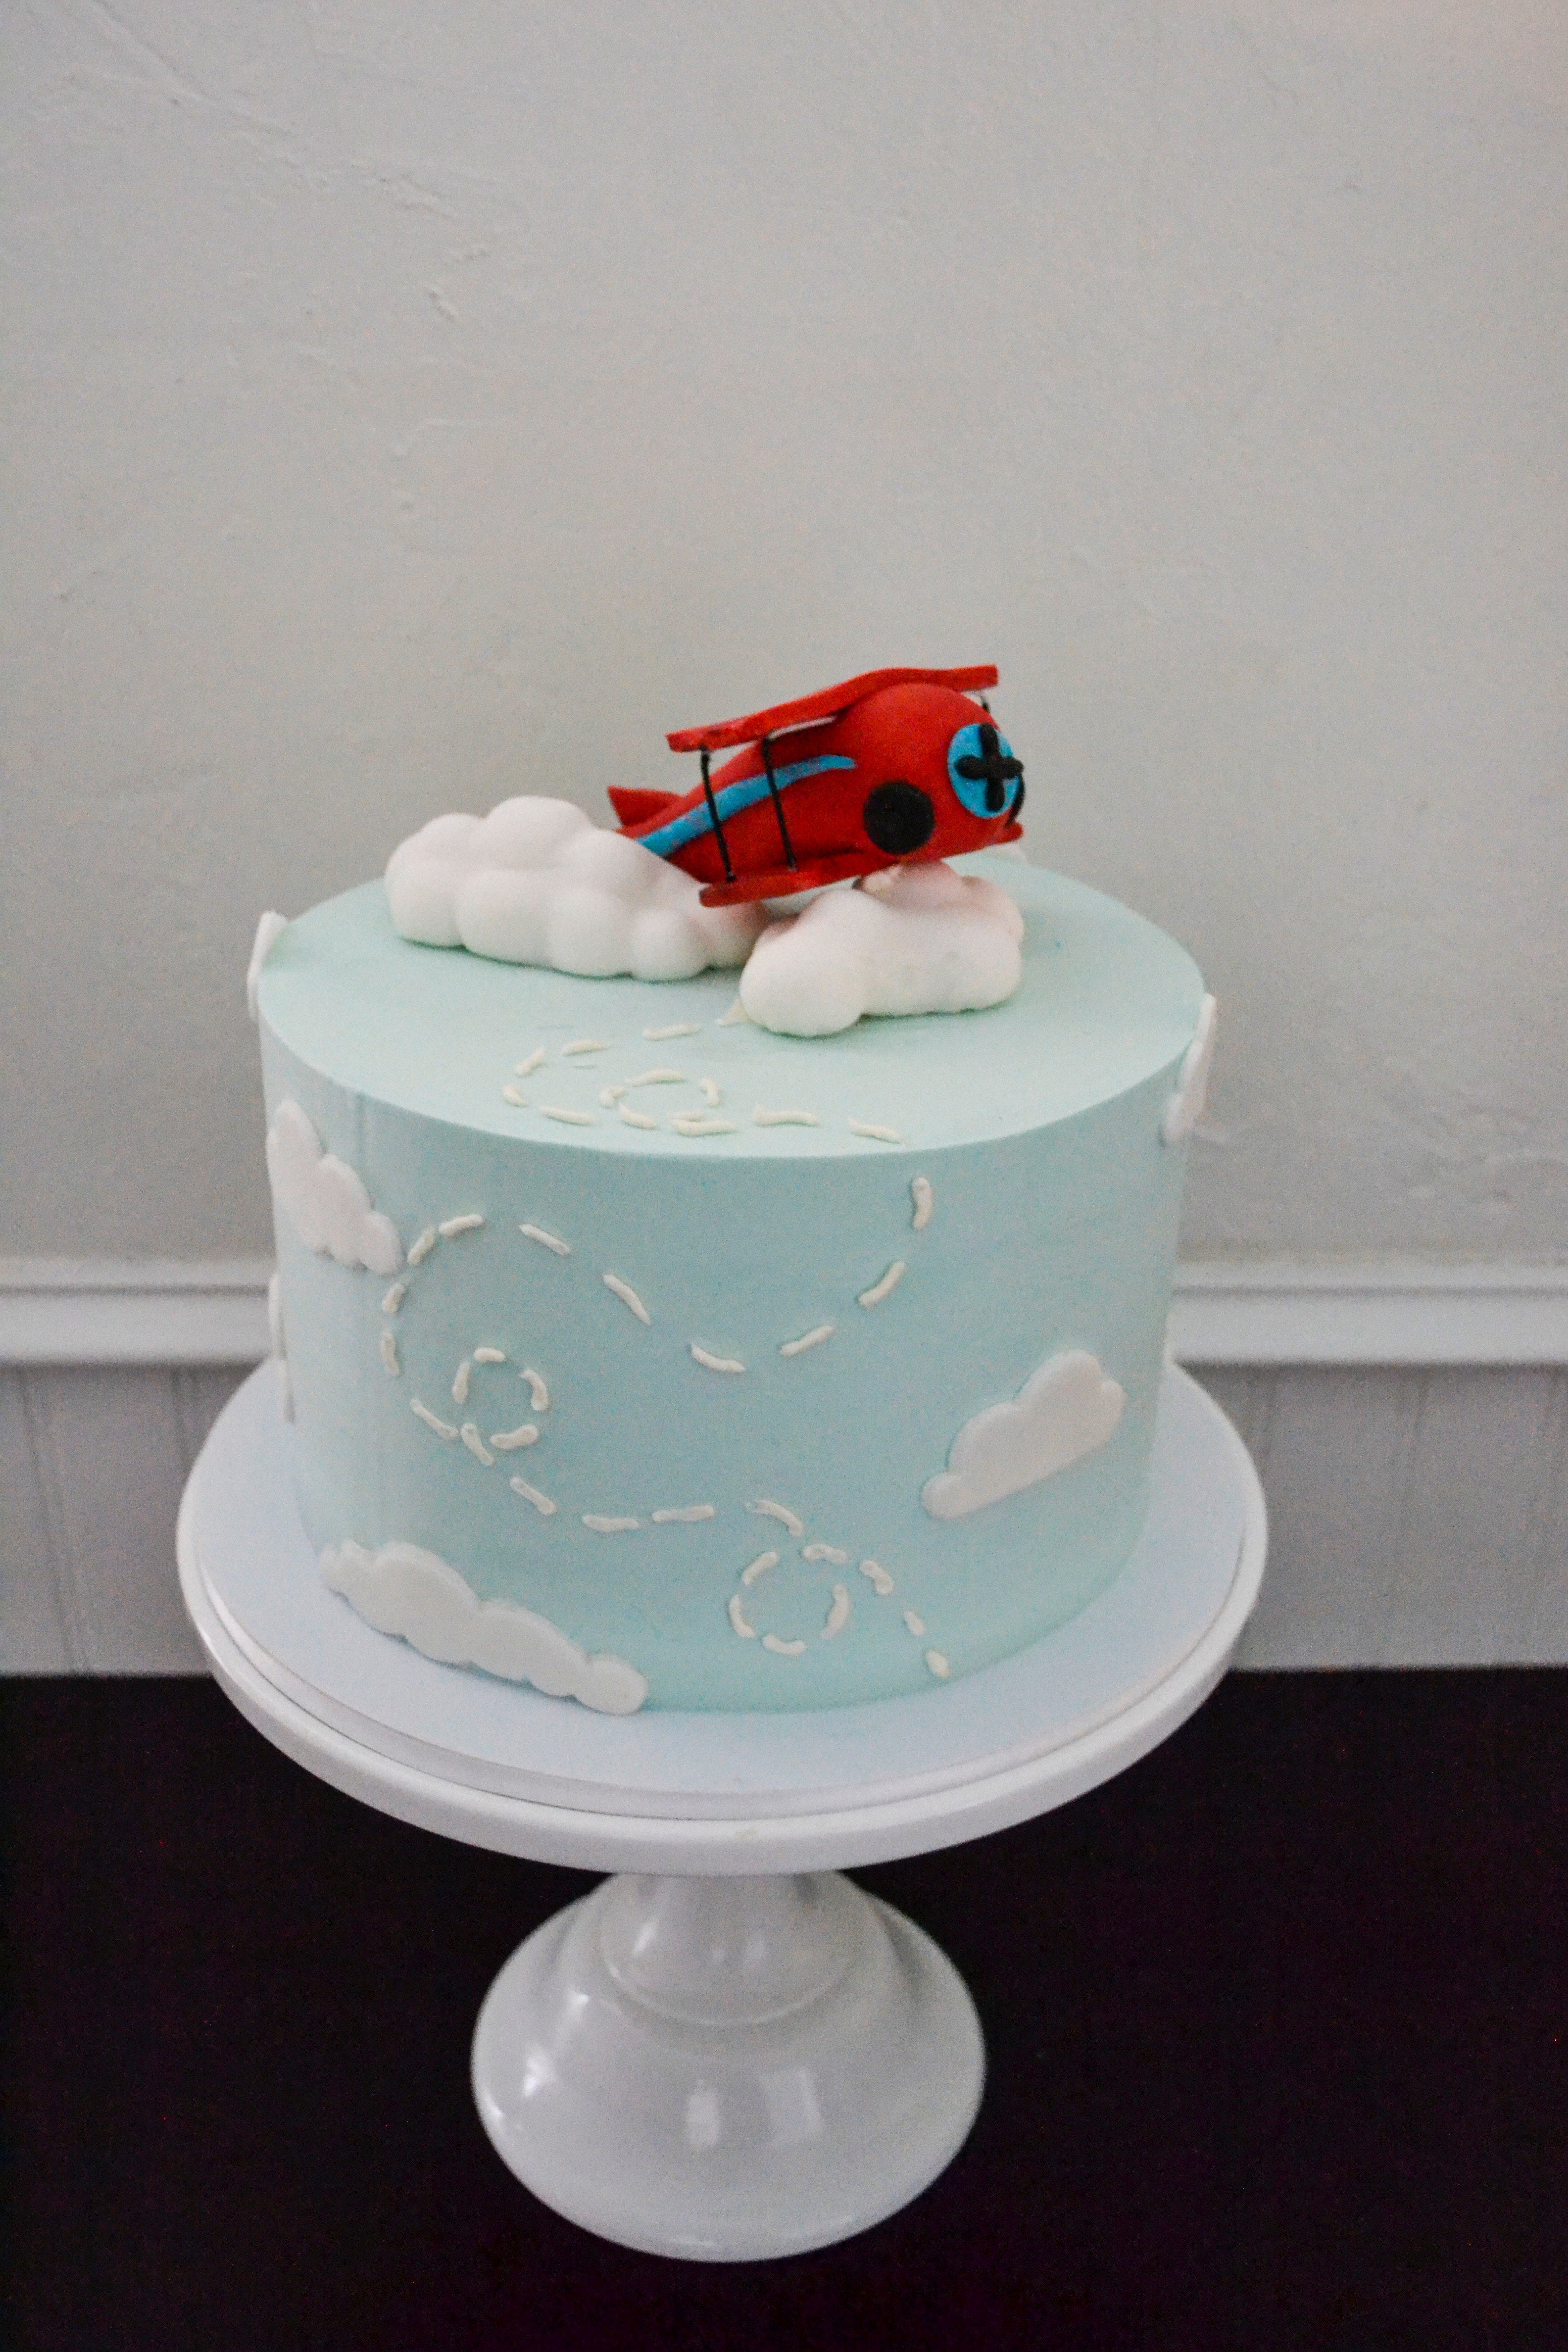 Plane Featured Cake, A Customize Featured cake